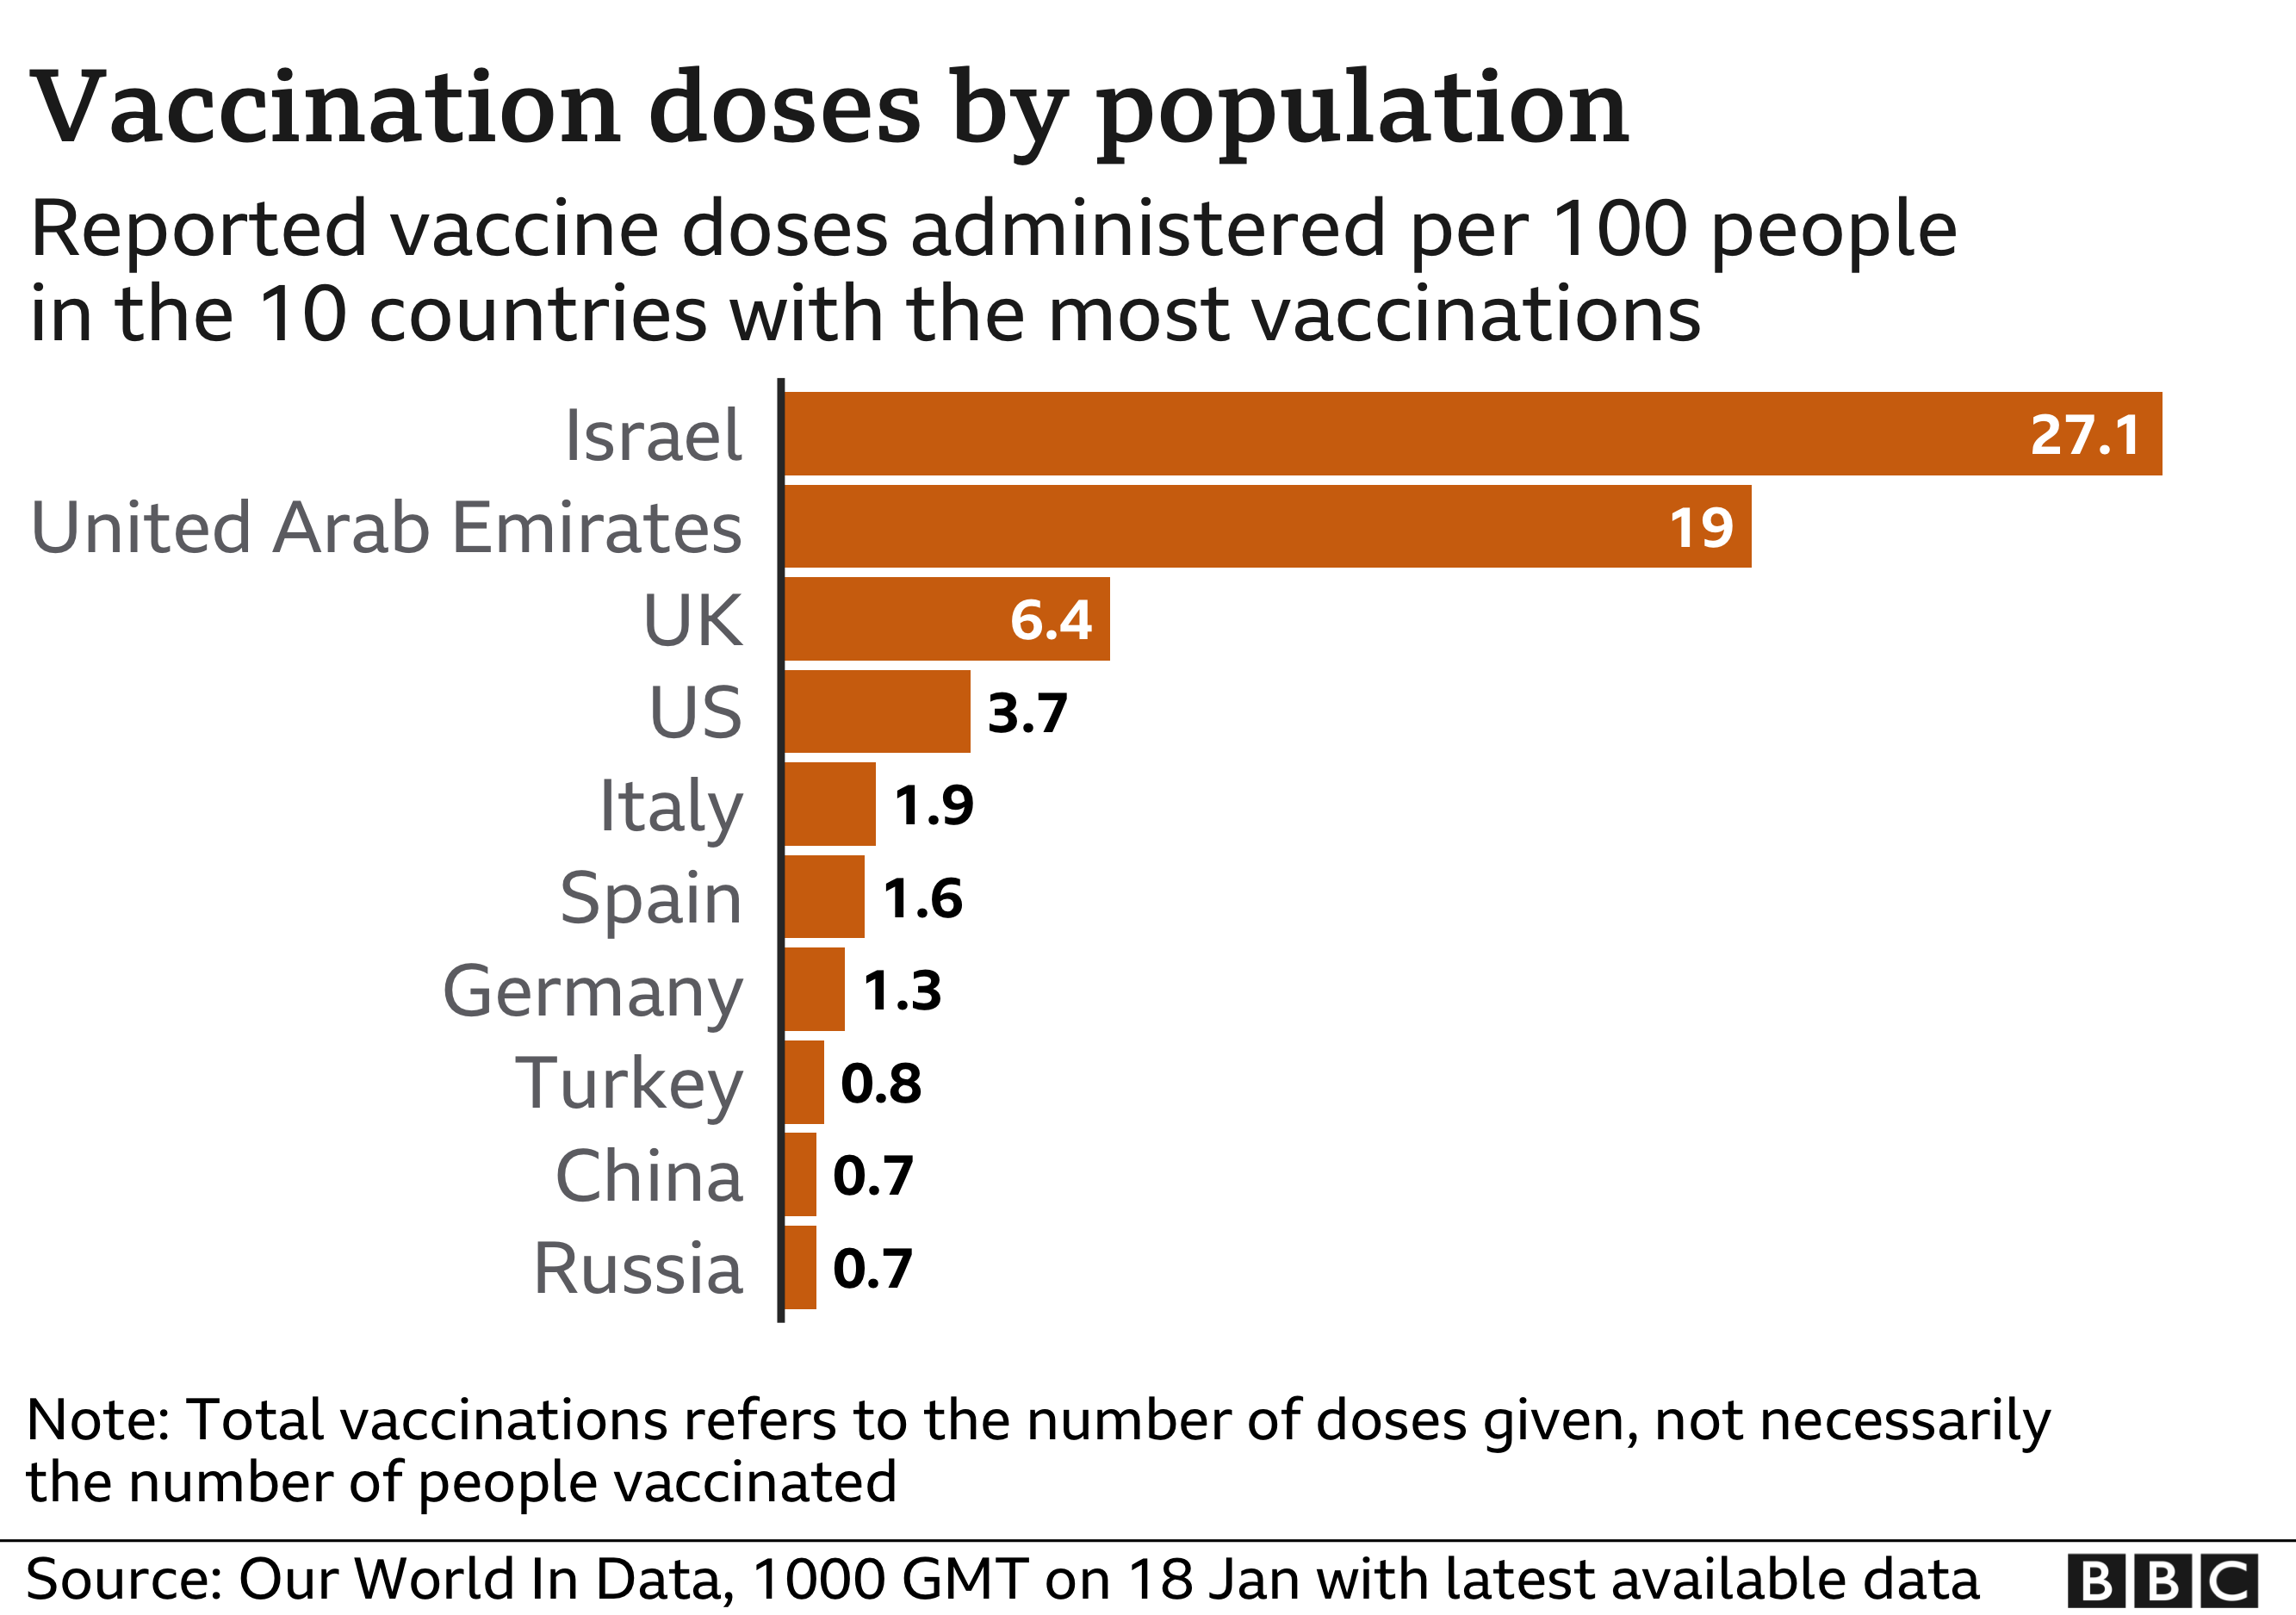 Chart shows doses administered per 100 people in 10 countries with most vaccinations. Updated 18 Jan.